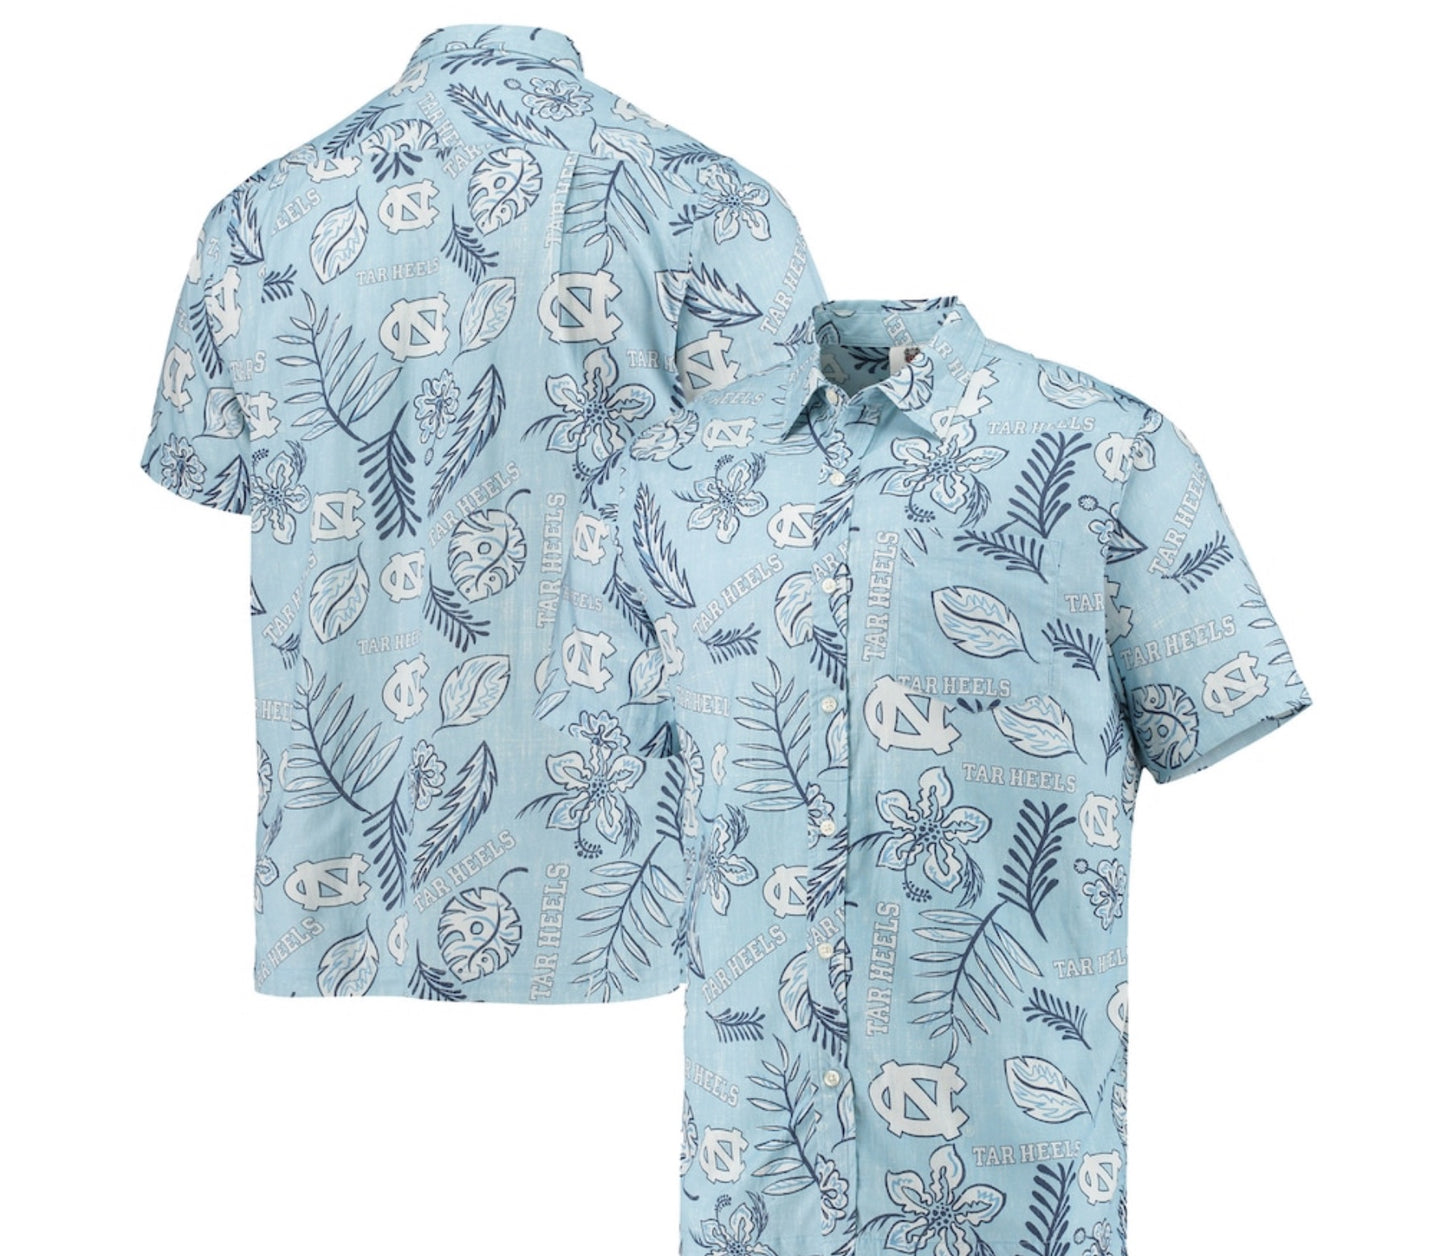 UNC Men’s Vintage Hawaiian Shirt from Wes and Willy